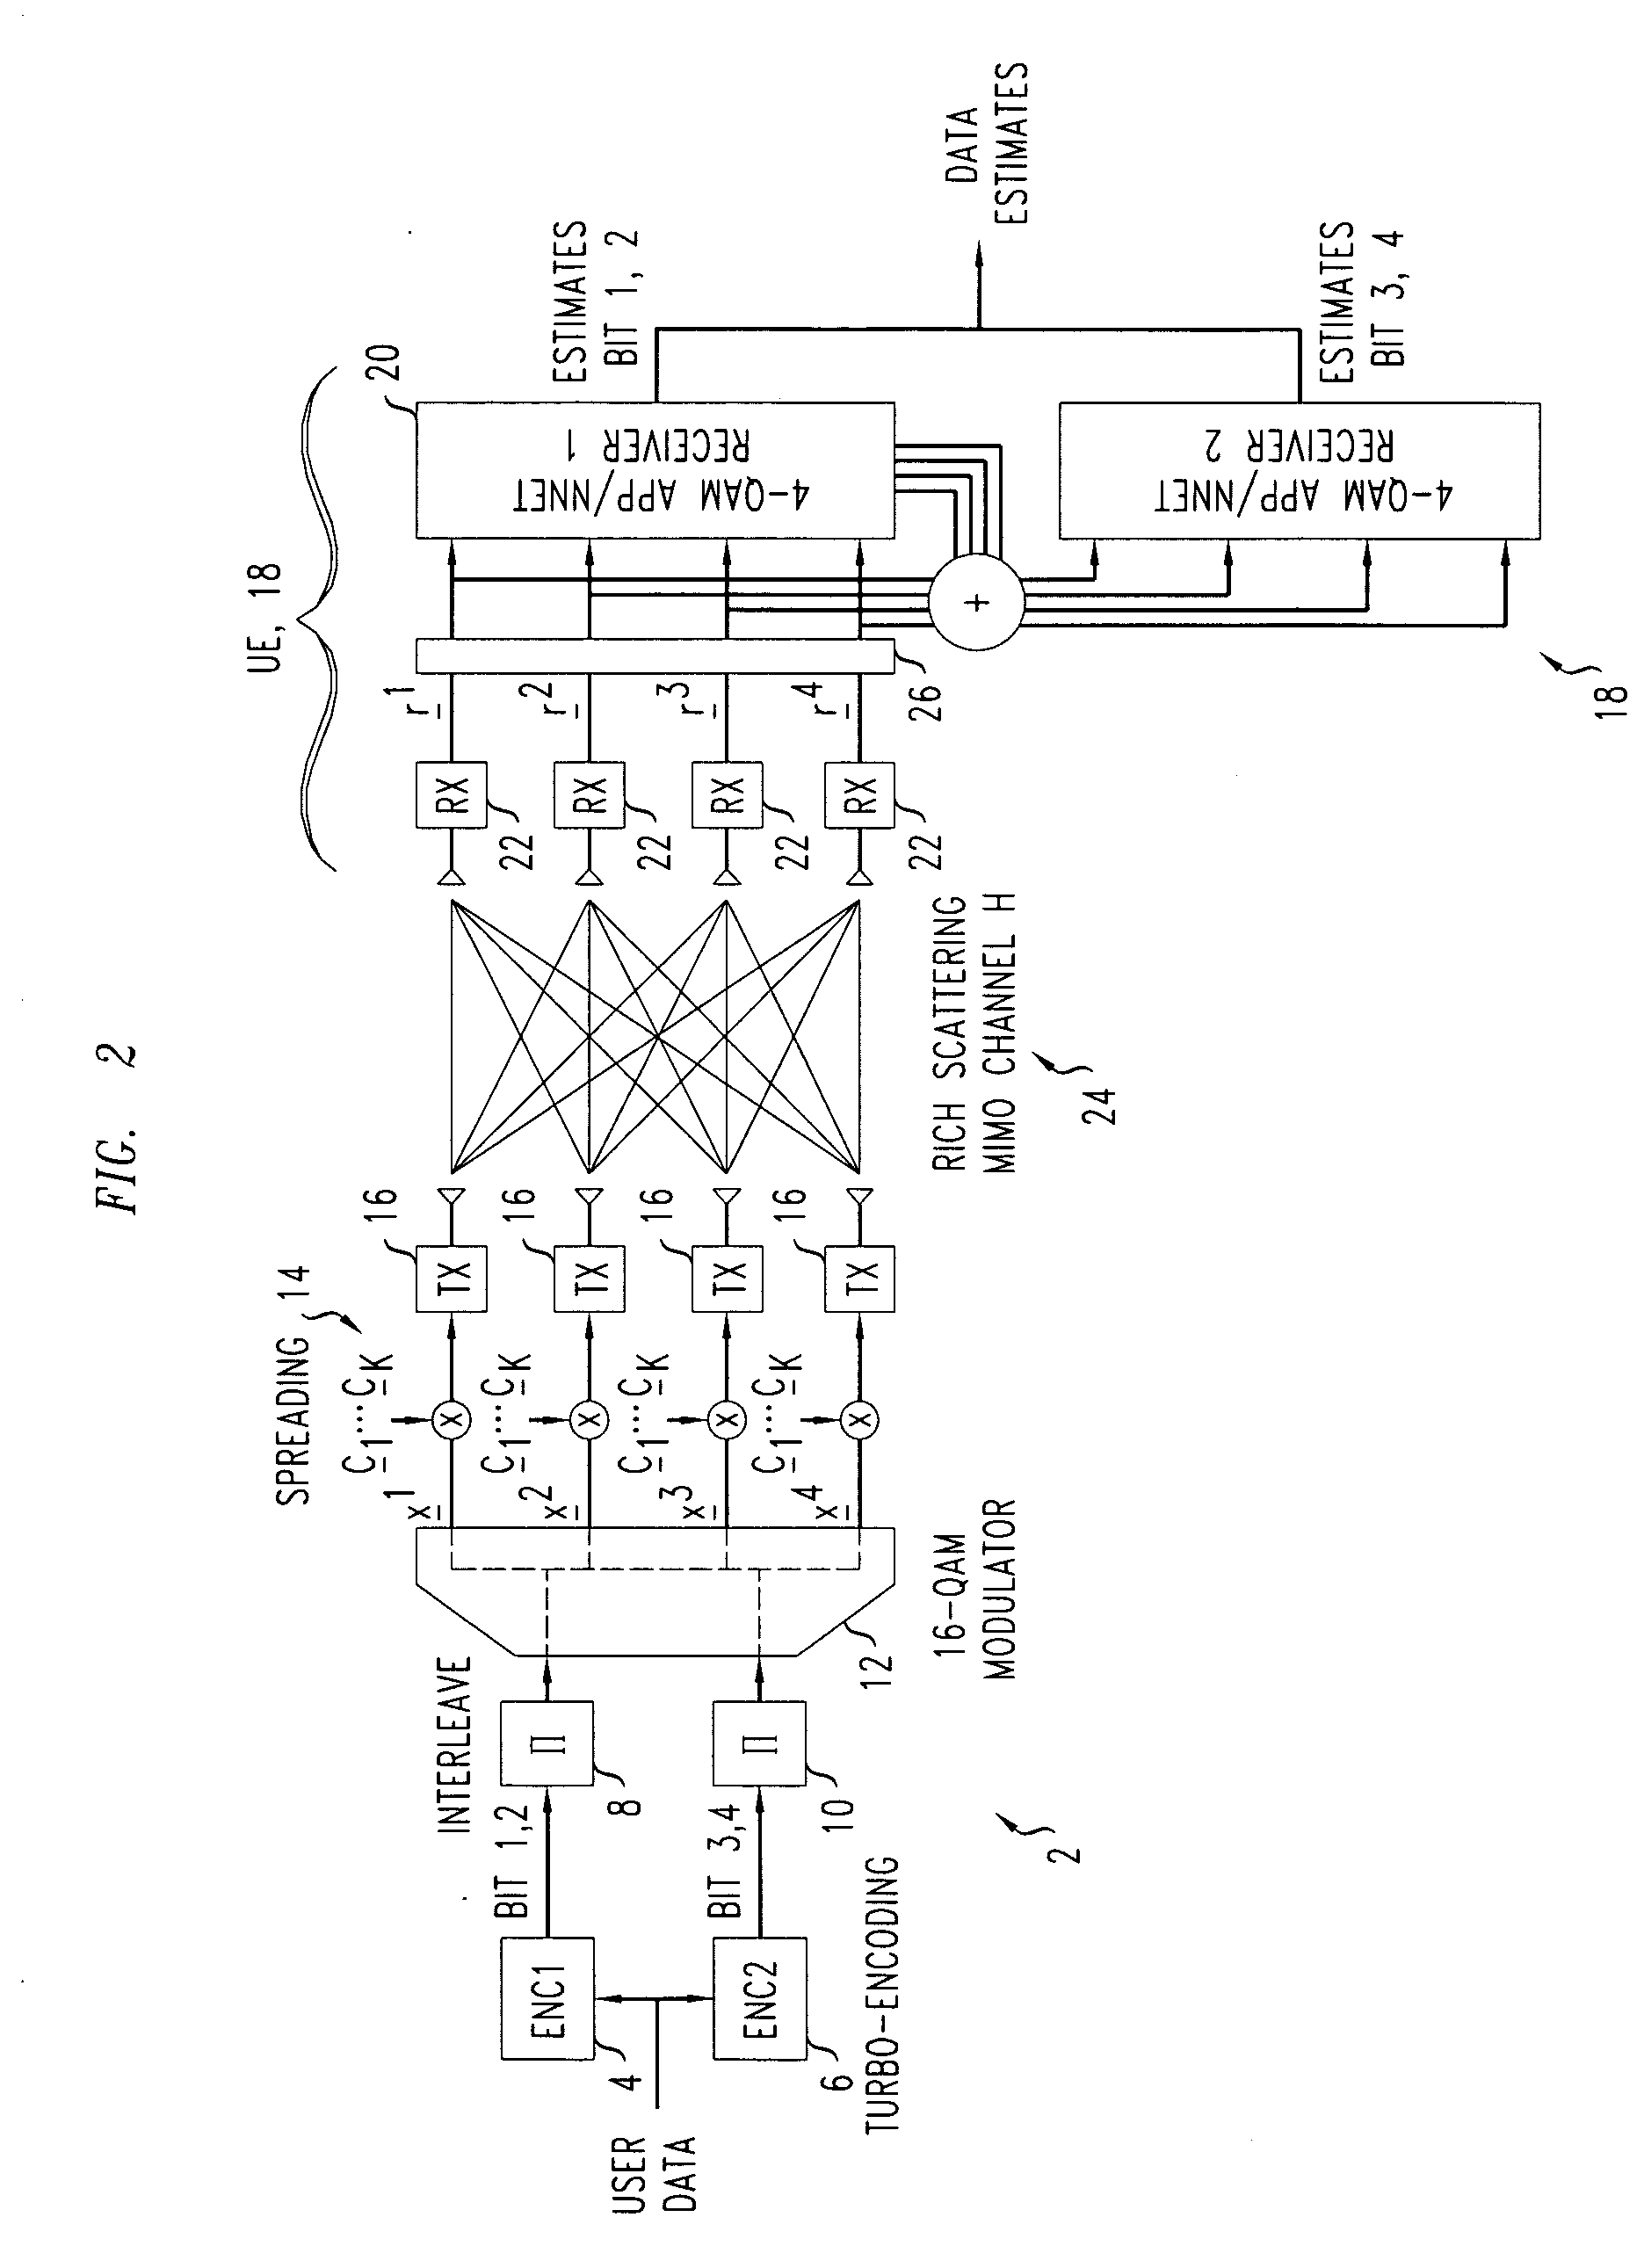 Modulation in a mobile telecommunications system